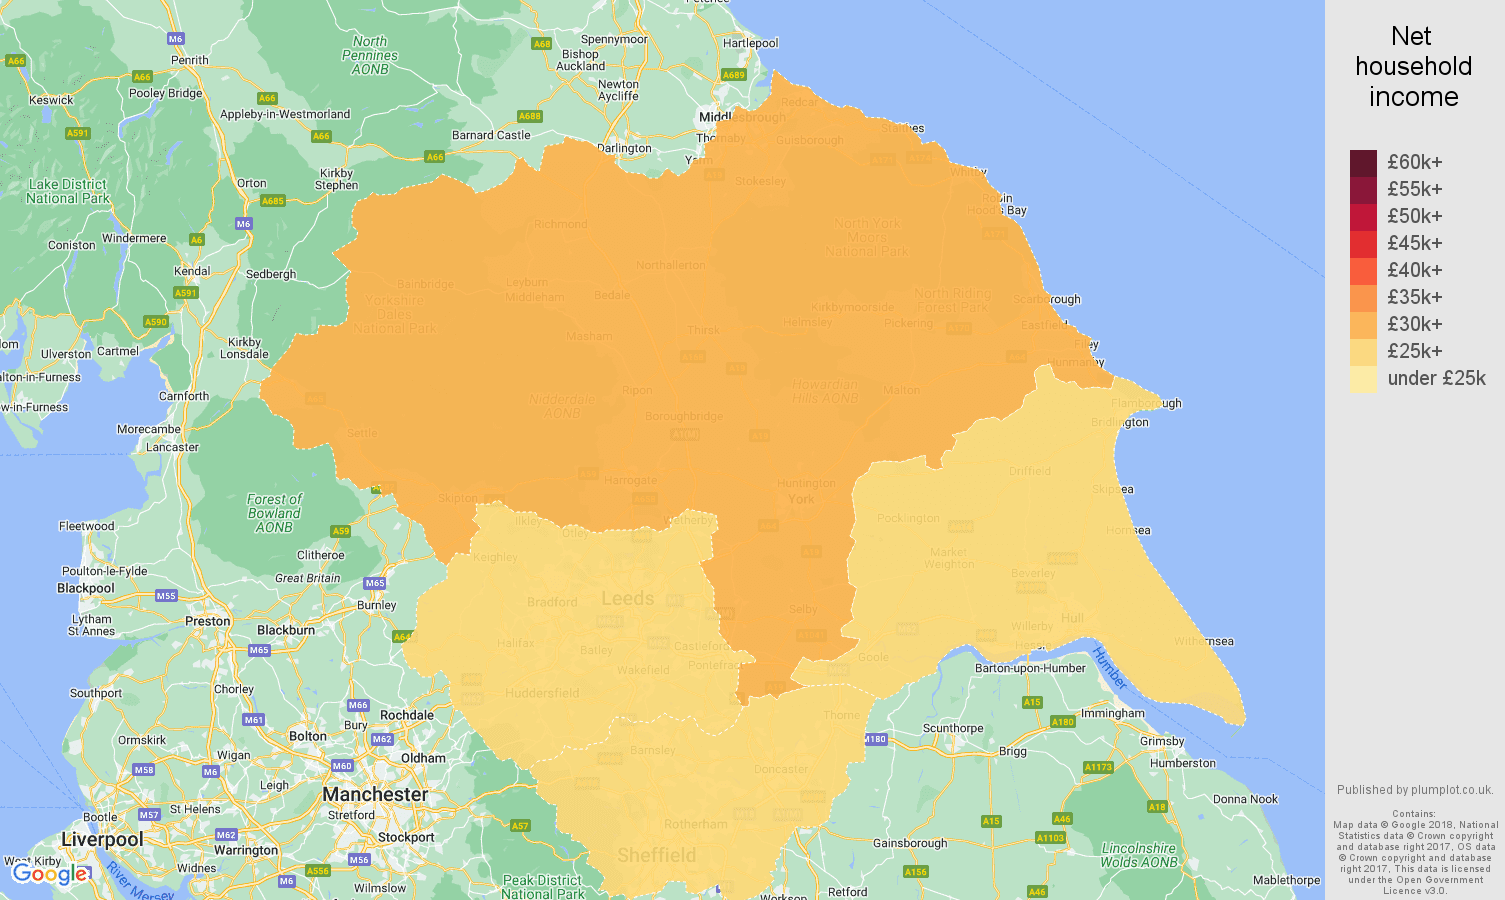 Yorkshire net household income map